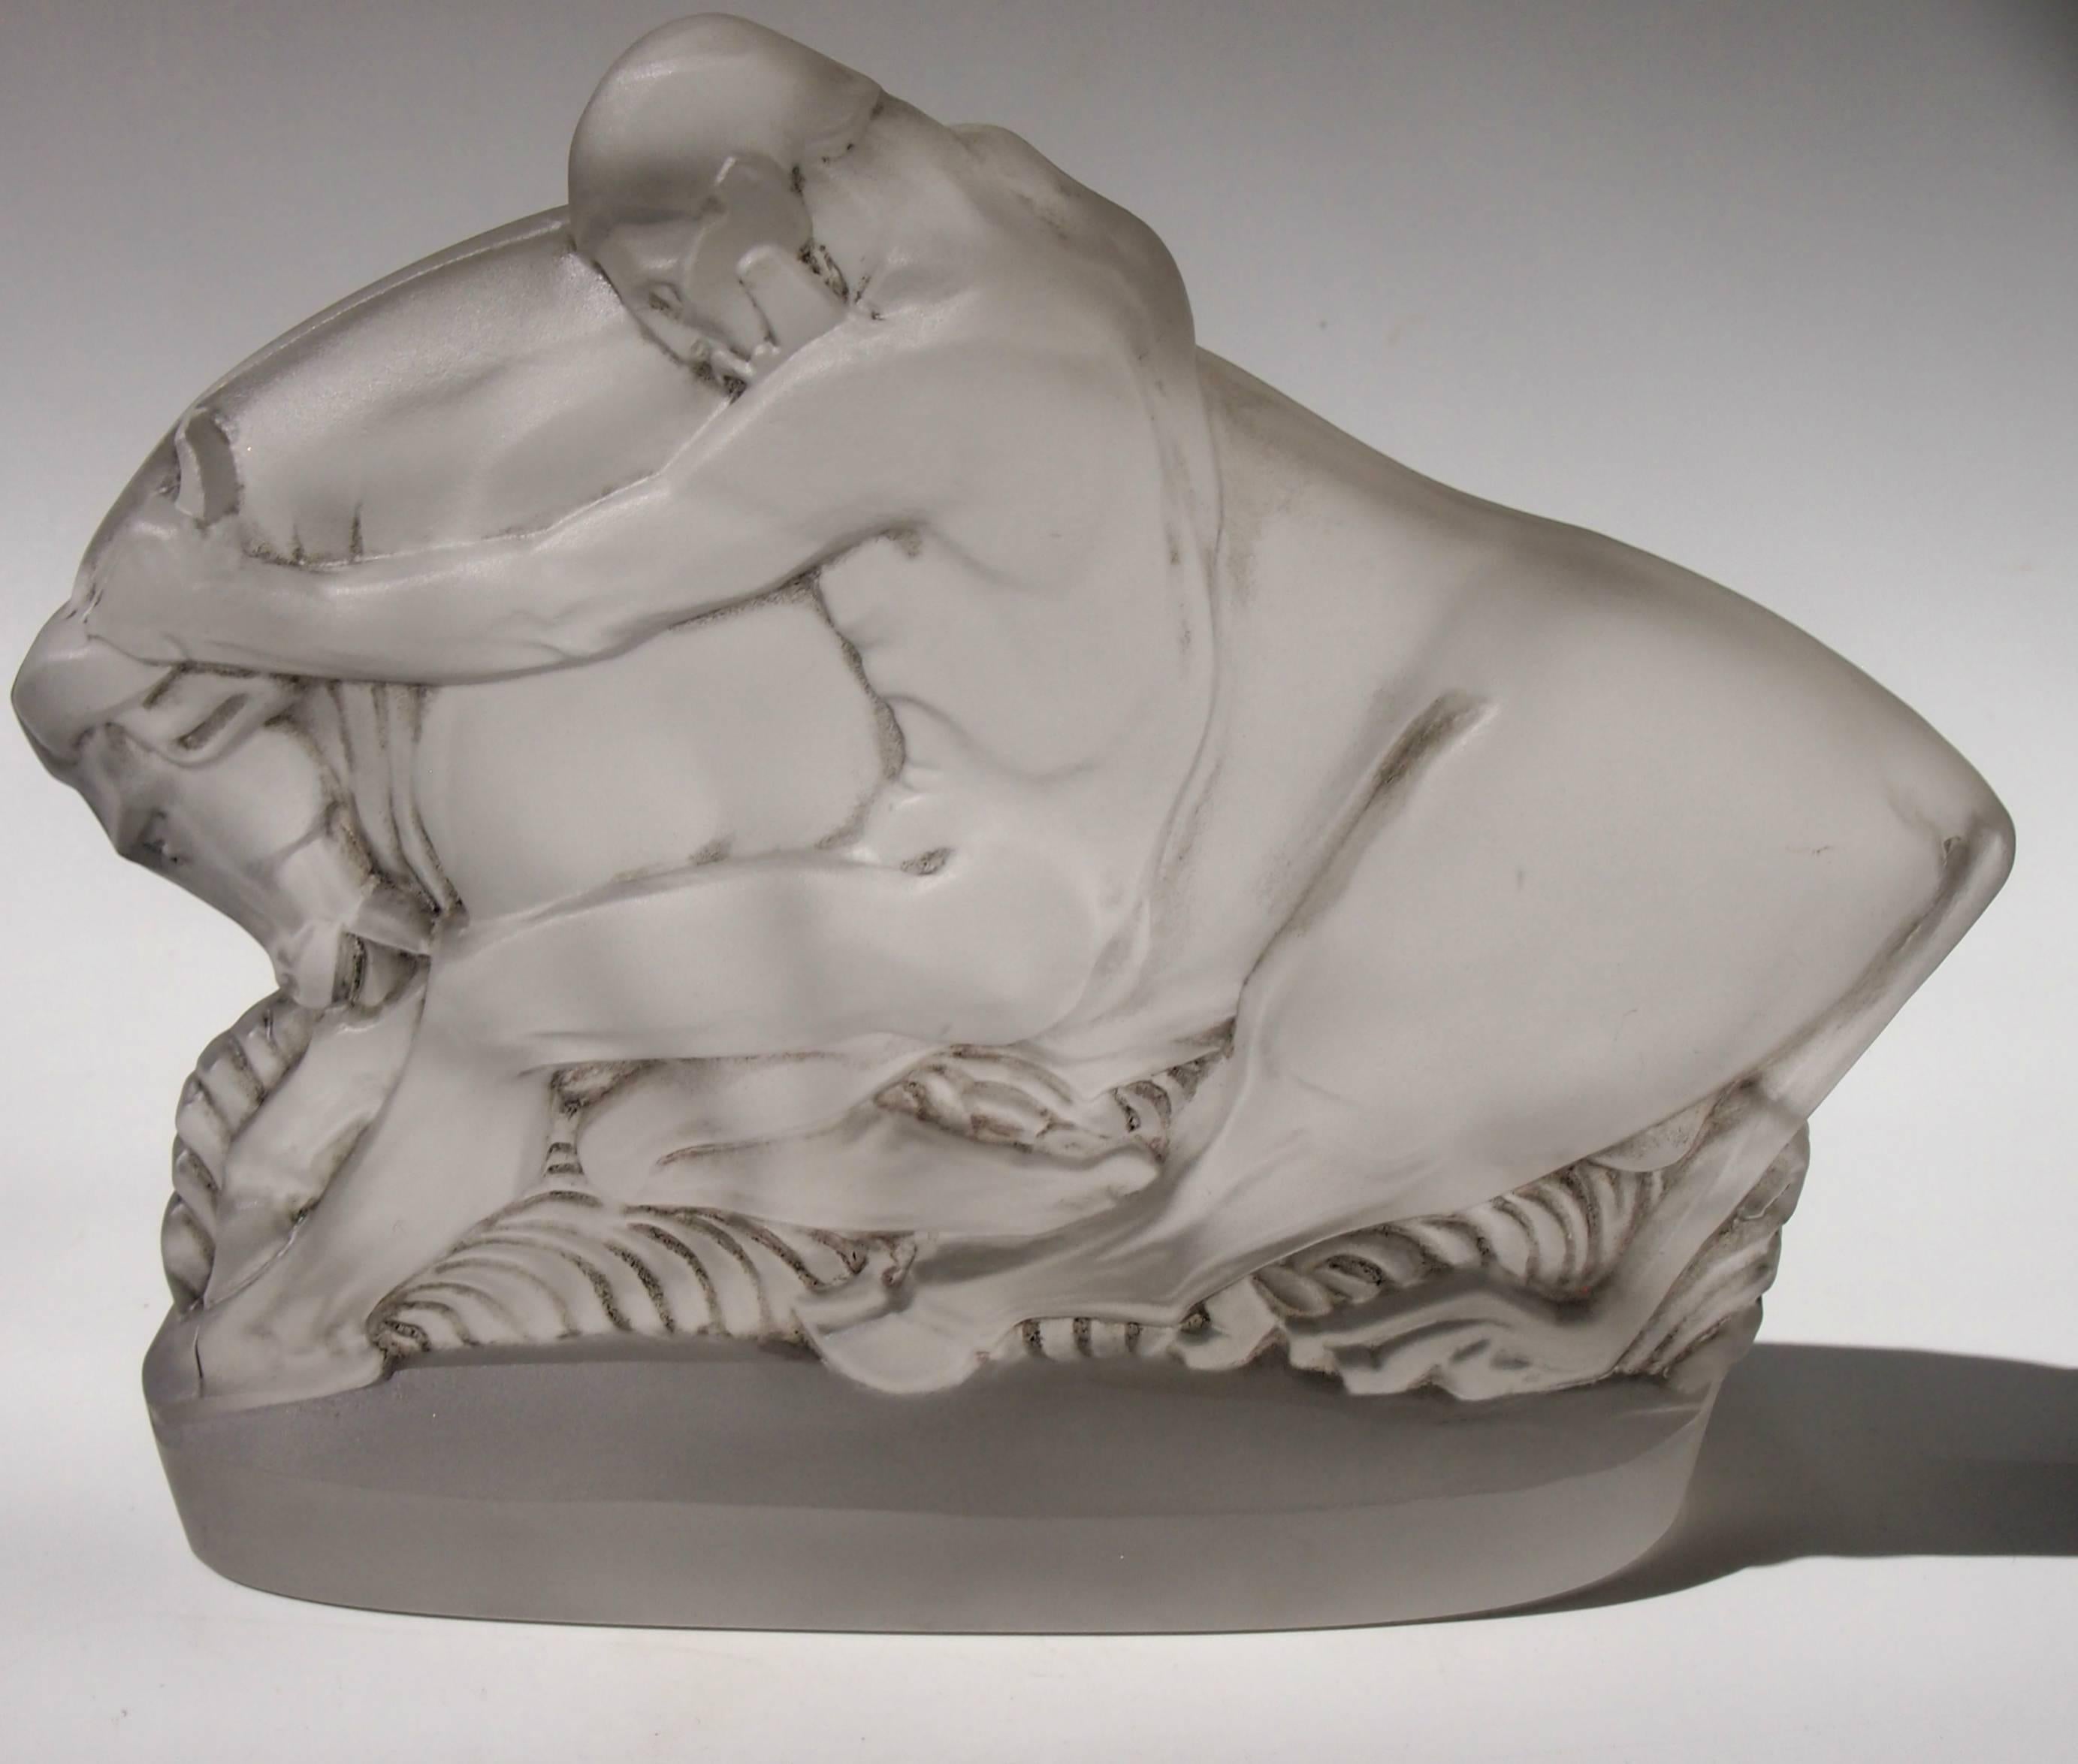 Possibly the most iconic piece of British Art Deco glass. This is a statue of Hercules capturing the Cretan Bull designed by Walter Gilbert for John Walsh Walsh -part of their Vesta range. This depicts the 7th Labour of Hercules. Original grey